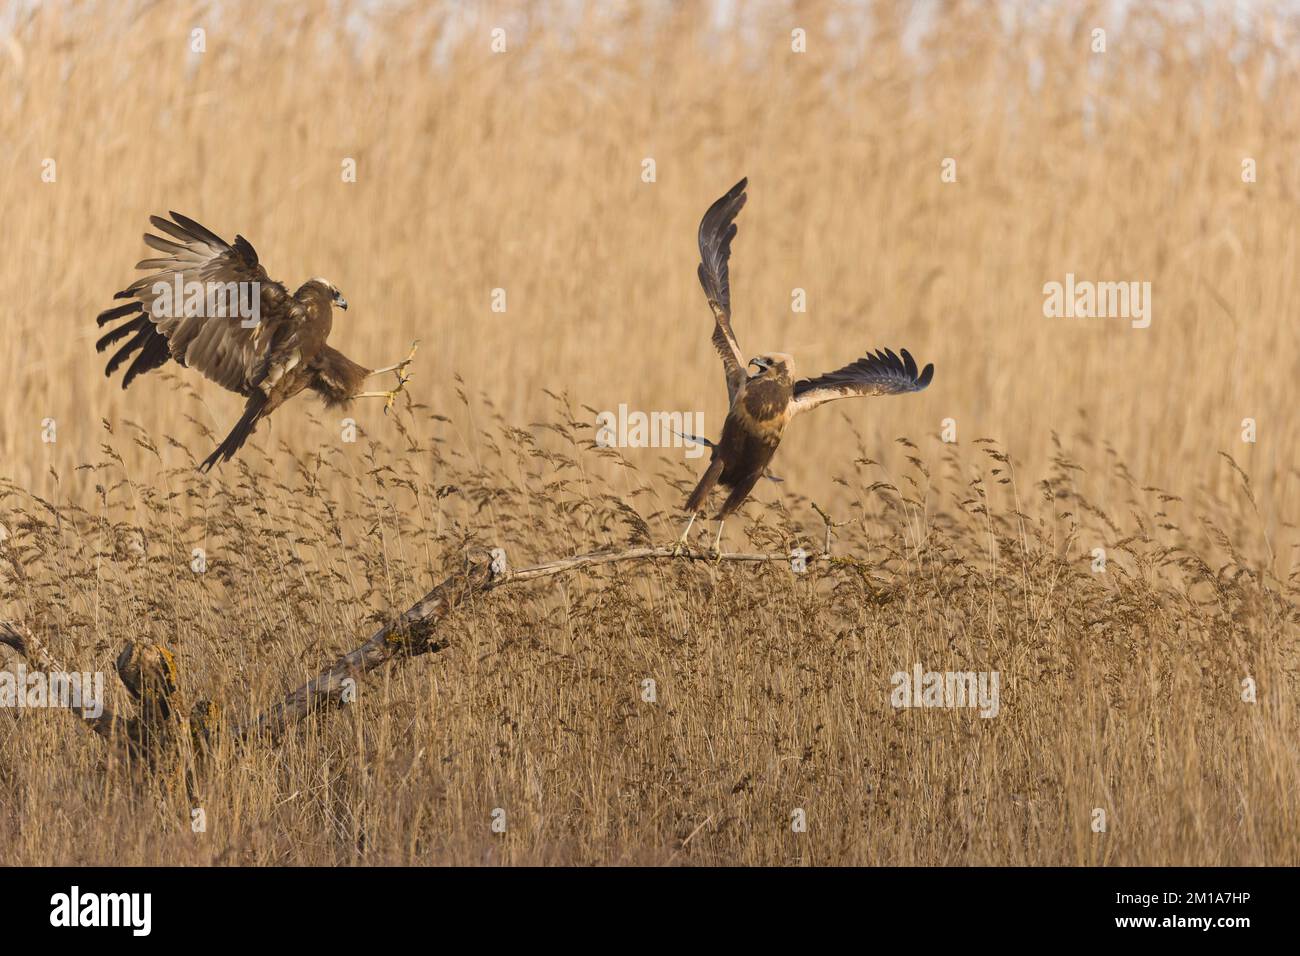 Marsh harrier Circus aeruginosus, 2 adult females, 1 flying in to displace the other standing on branch in reedbed, Toledo, Spain, November Stock Photo